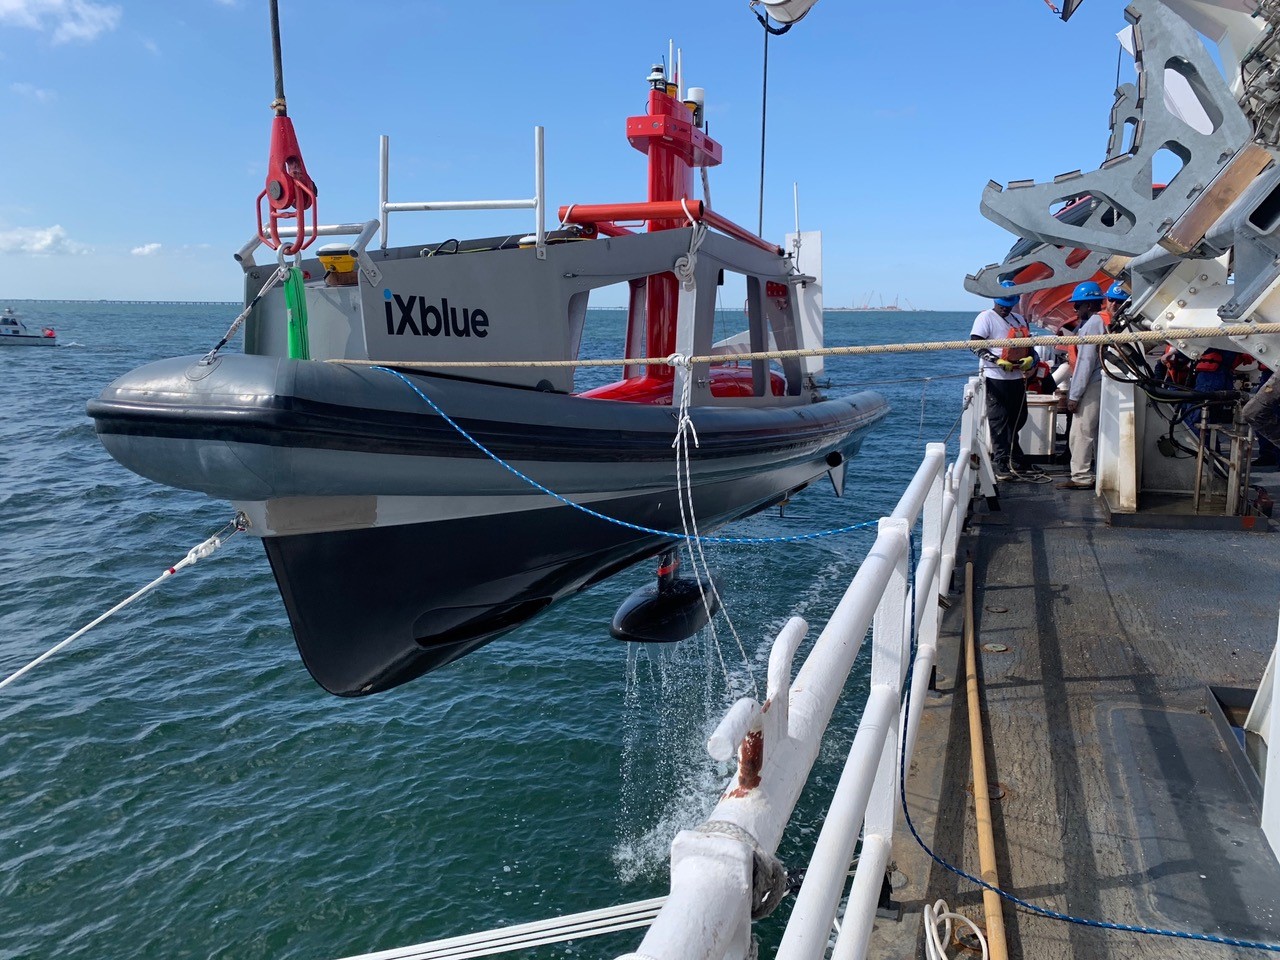 DriX being deployed from NOAAs Thomas Jefferson hydrographic survey vessel